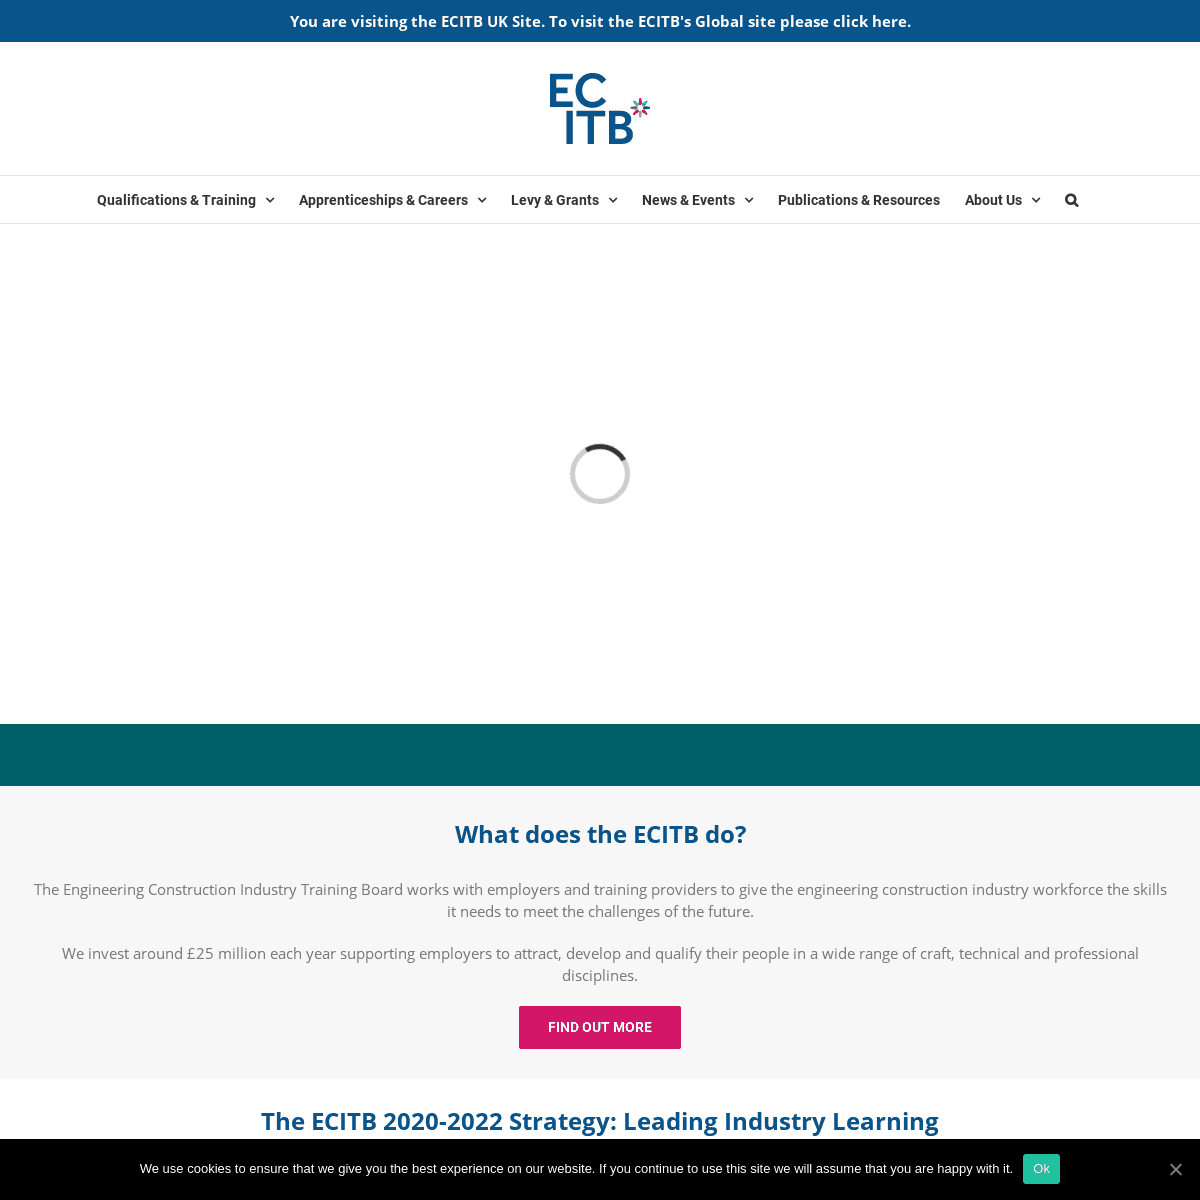 A complete backup of https://ecitb.org.uk